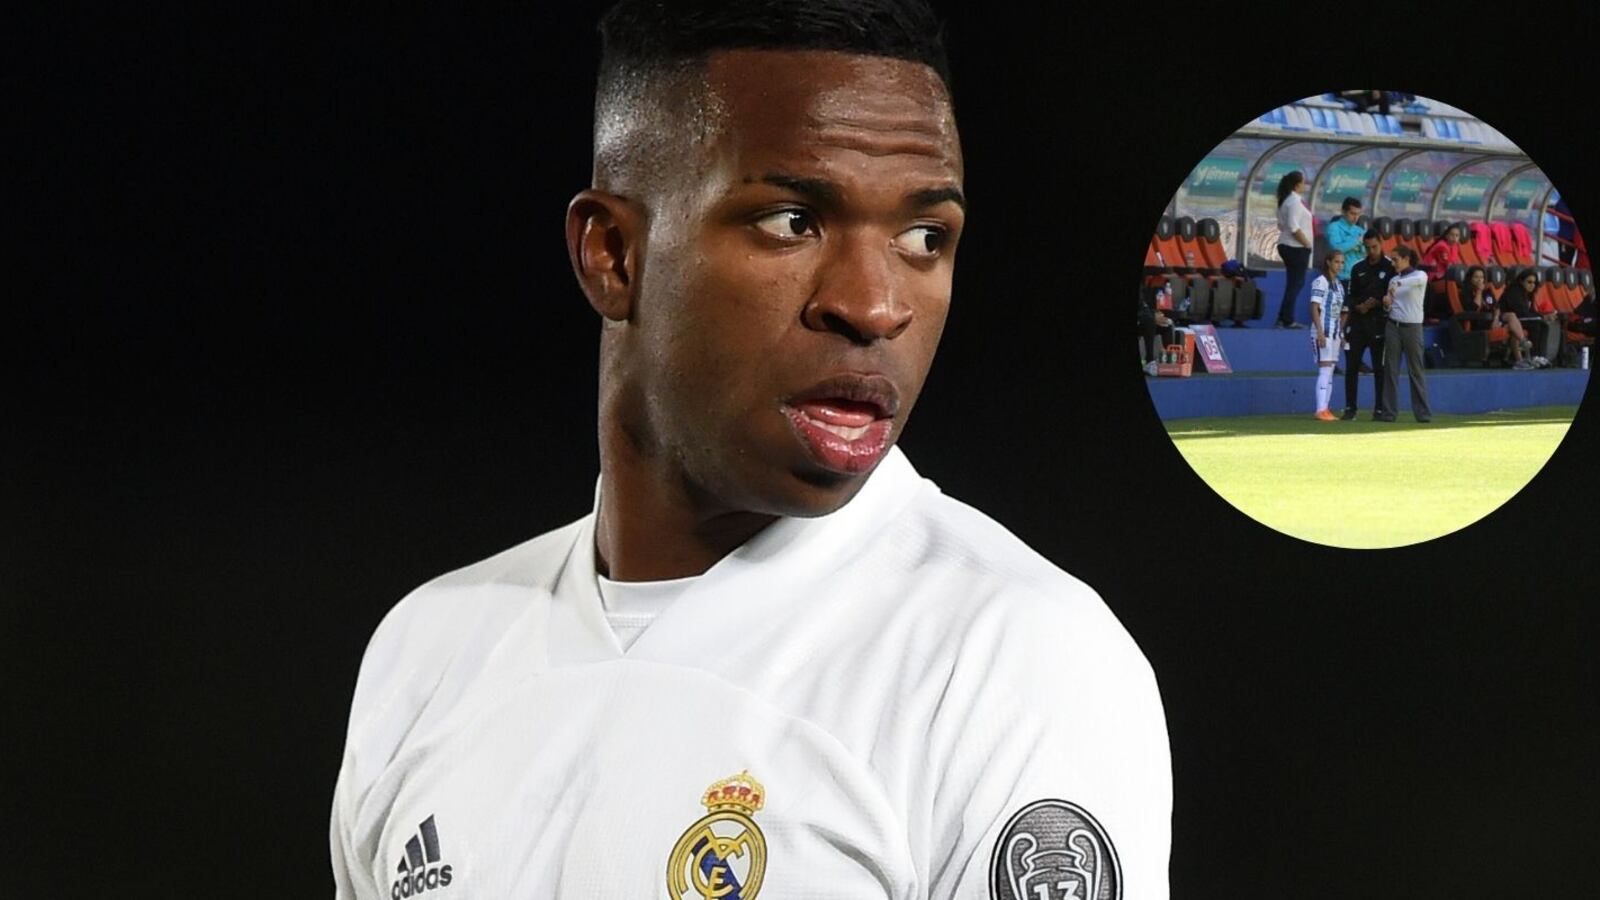 Mexican footballer who attracted Vinicius on Real Madrid match day